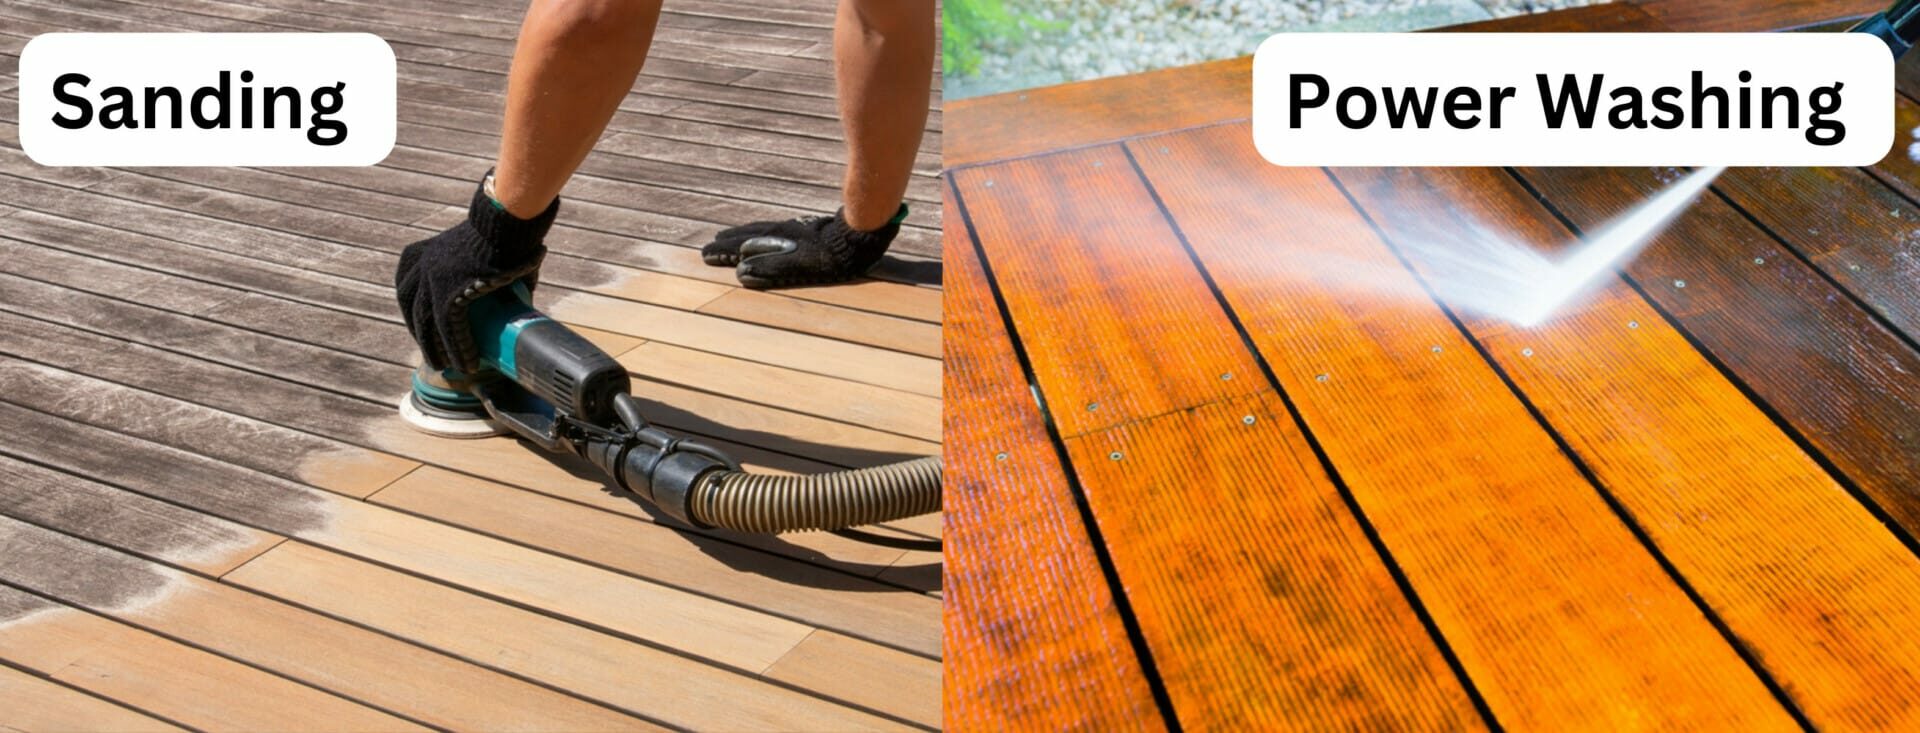 Split image comparing two deck maintenance techniques: sanding on the left and power washing on the right.